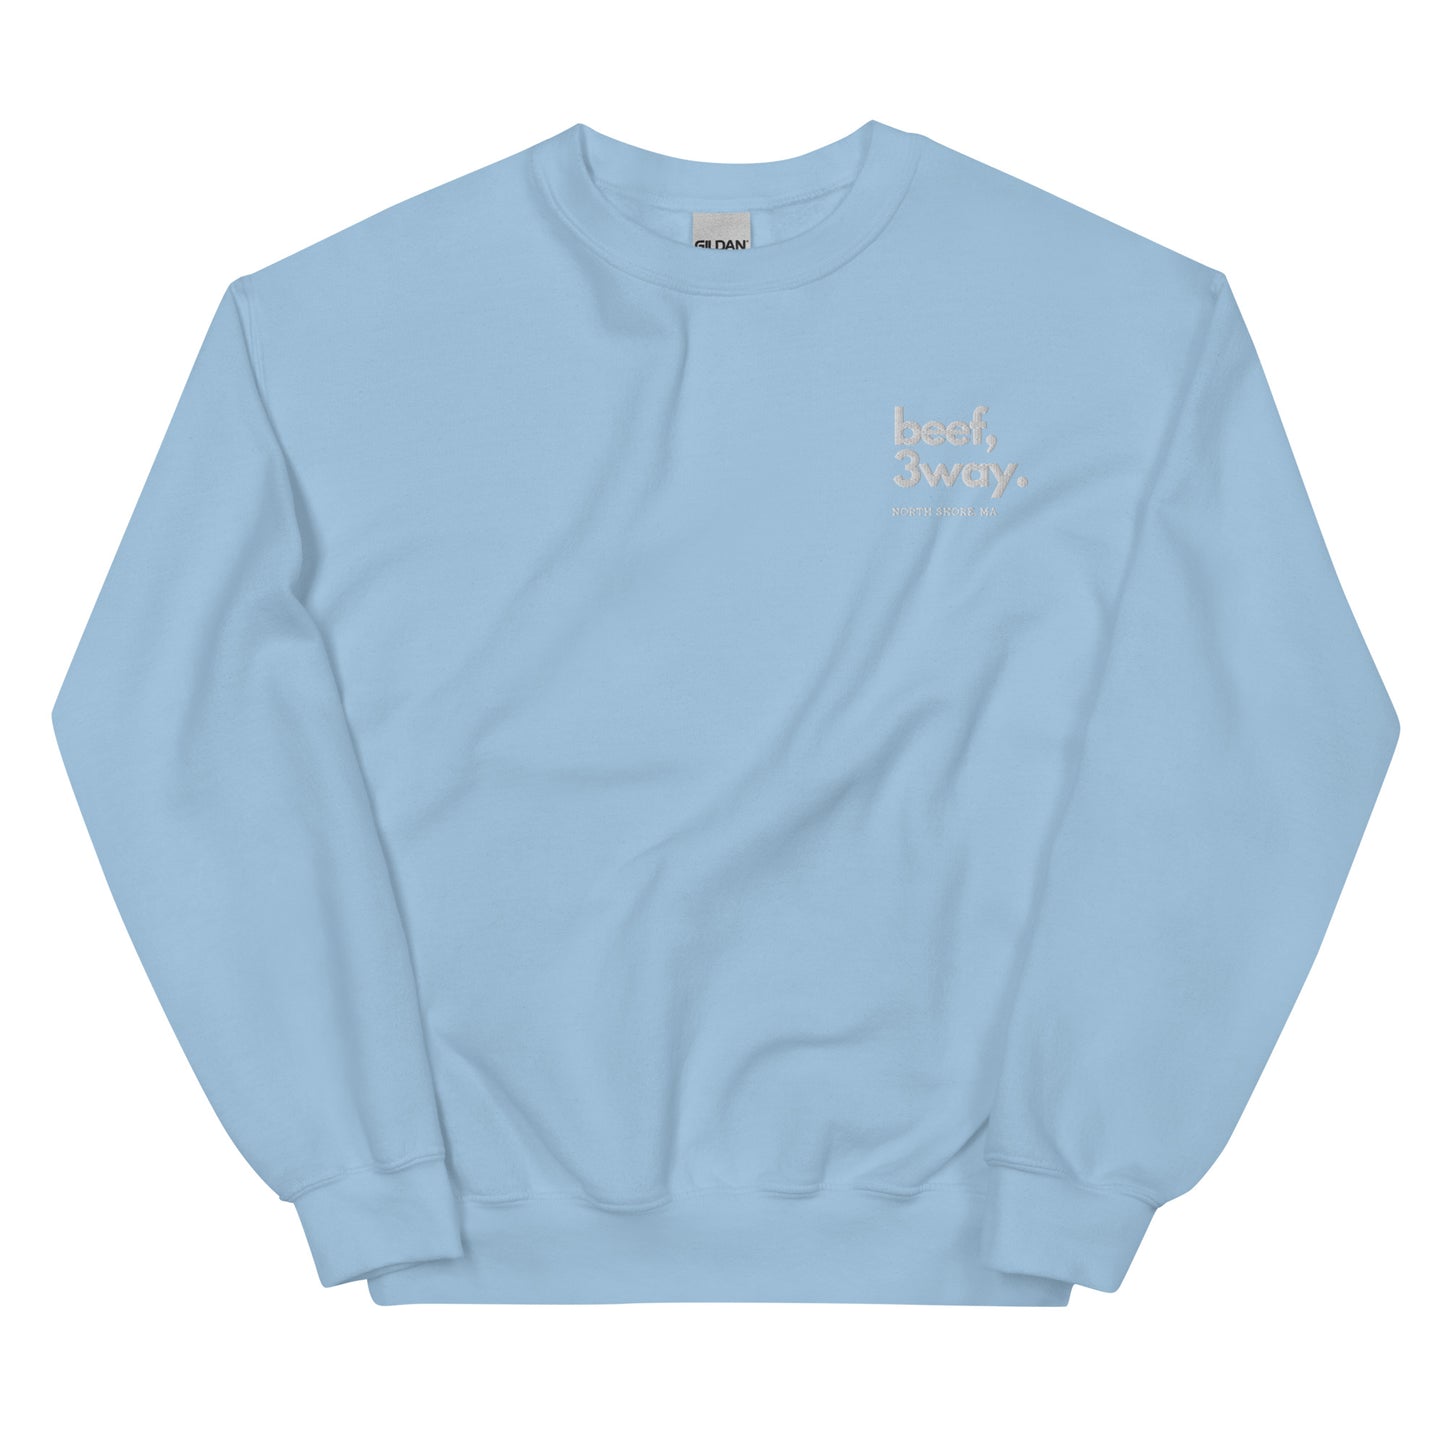 light blue crewneck that says "beef, 3way north shore ma" in white lettering